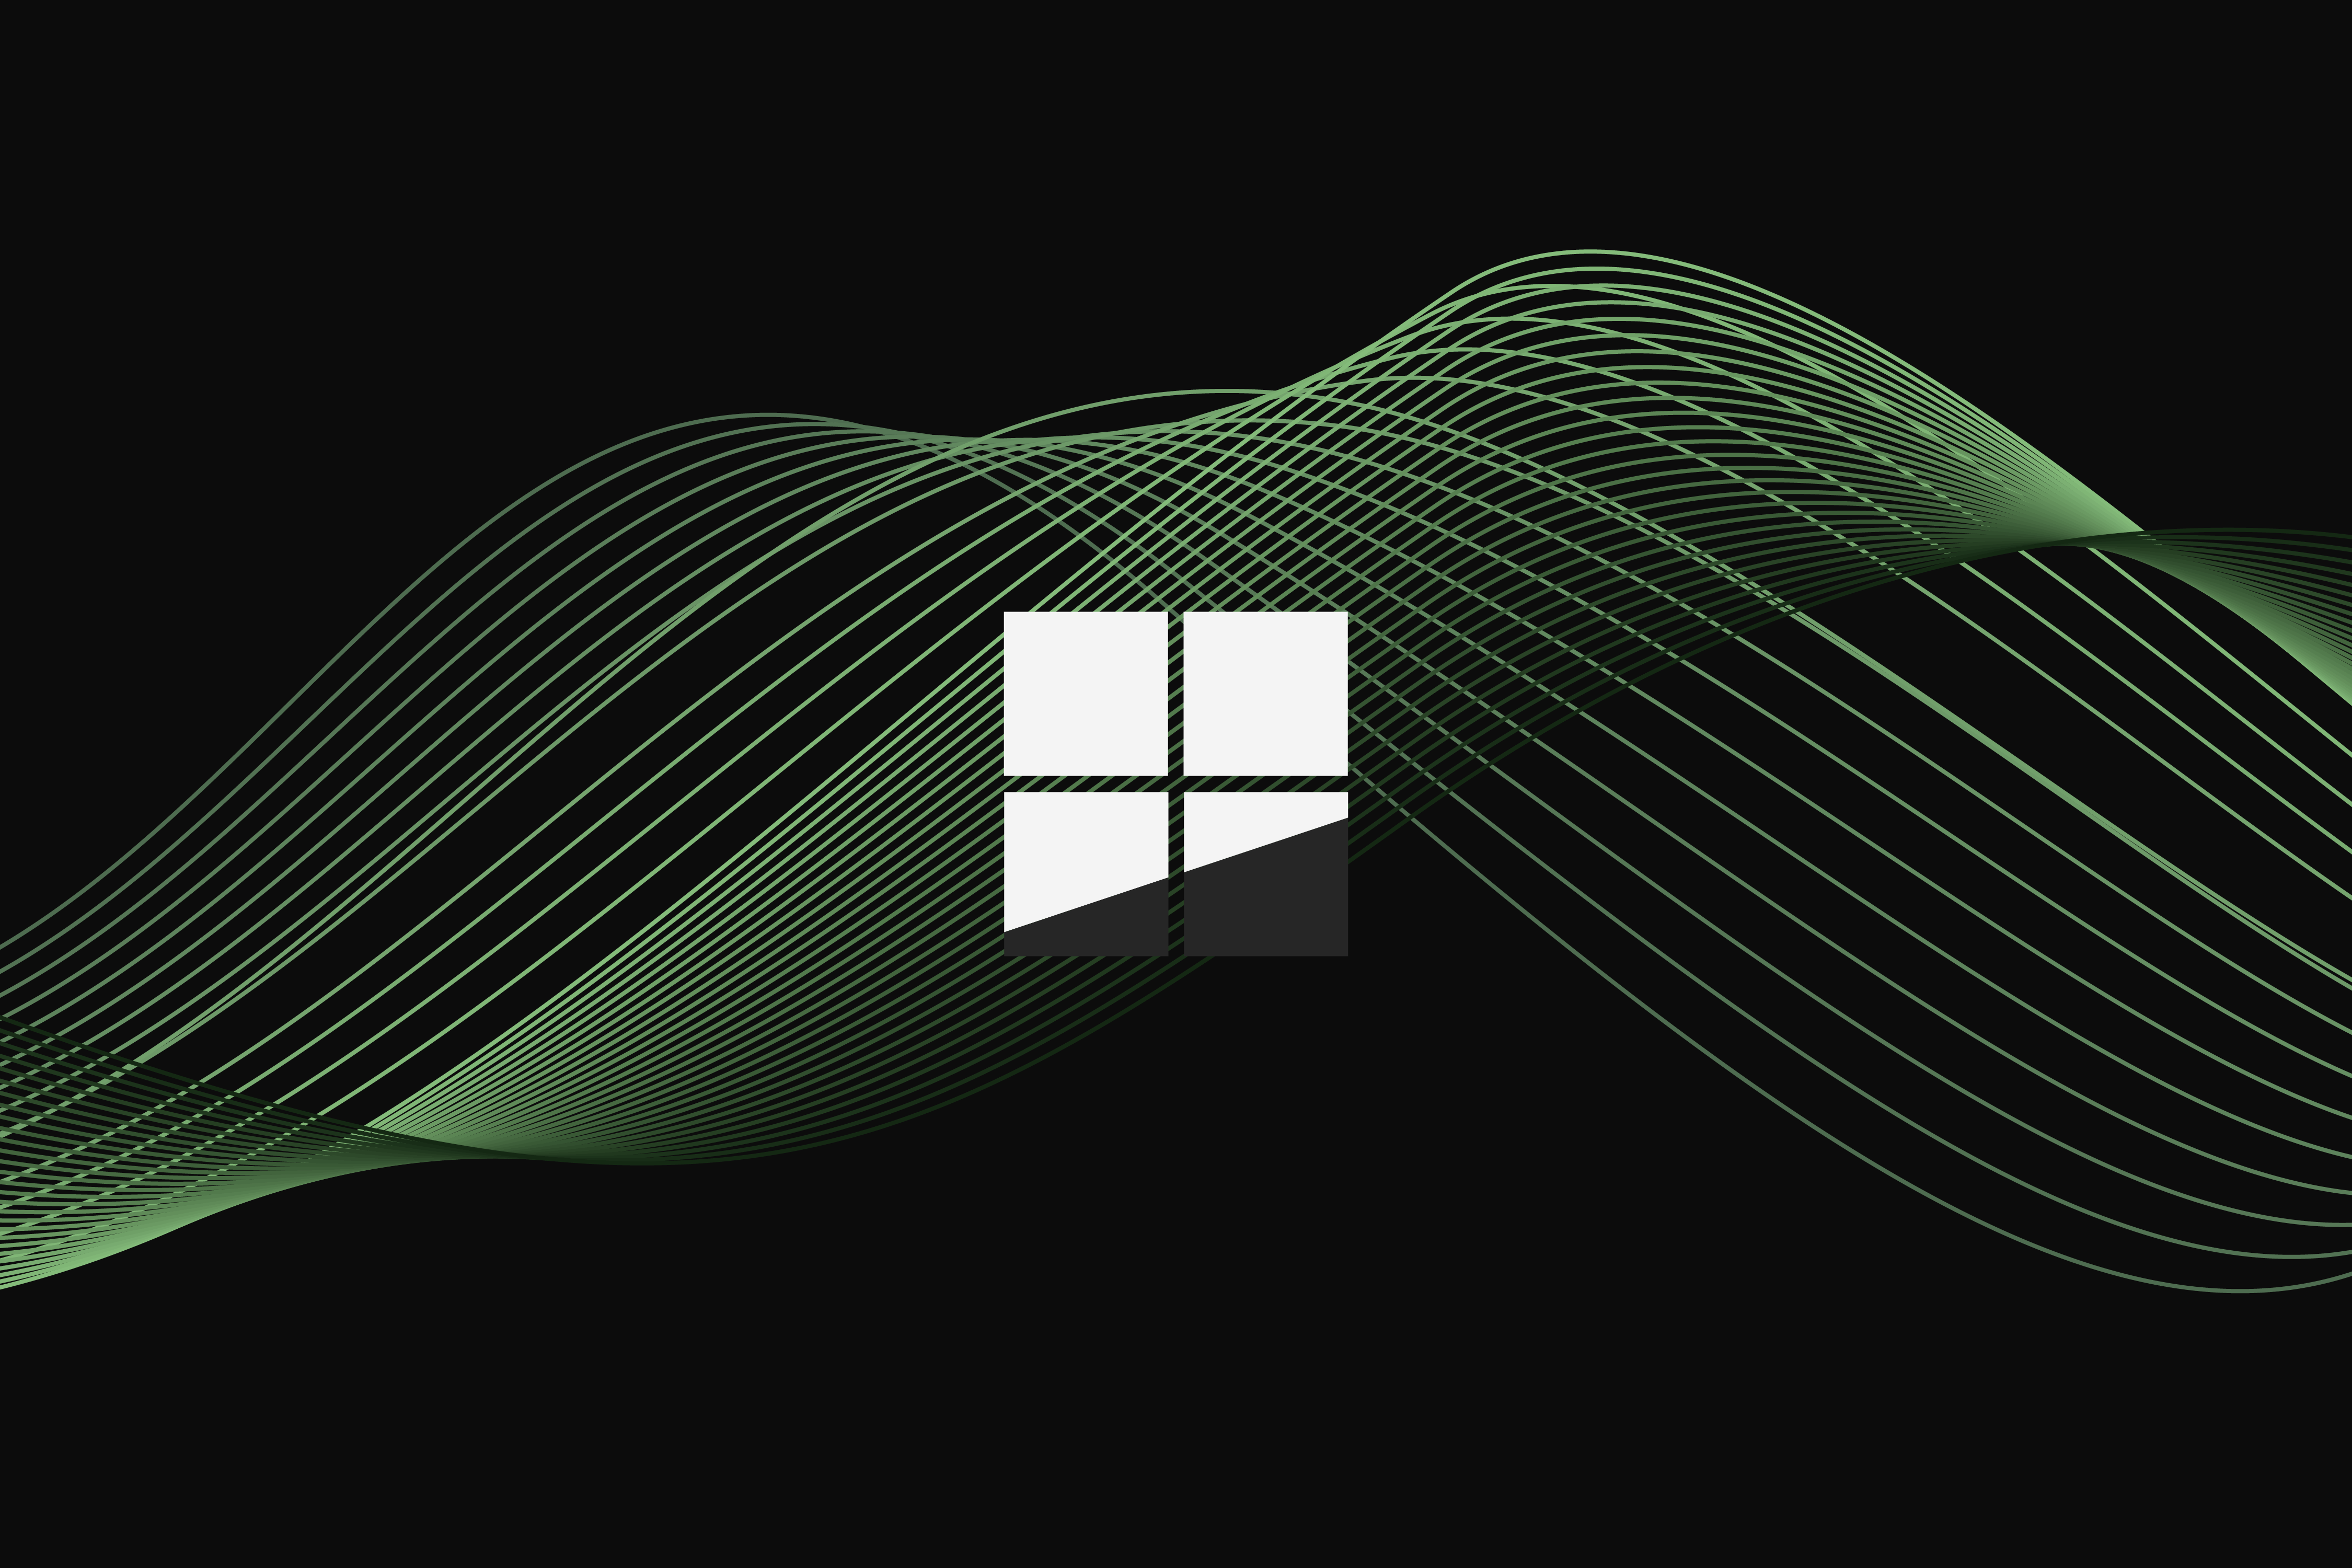 General 4500x3000 logo windows logo Microsoft lines waveforms simple background black green dystopian operating system